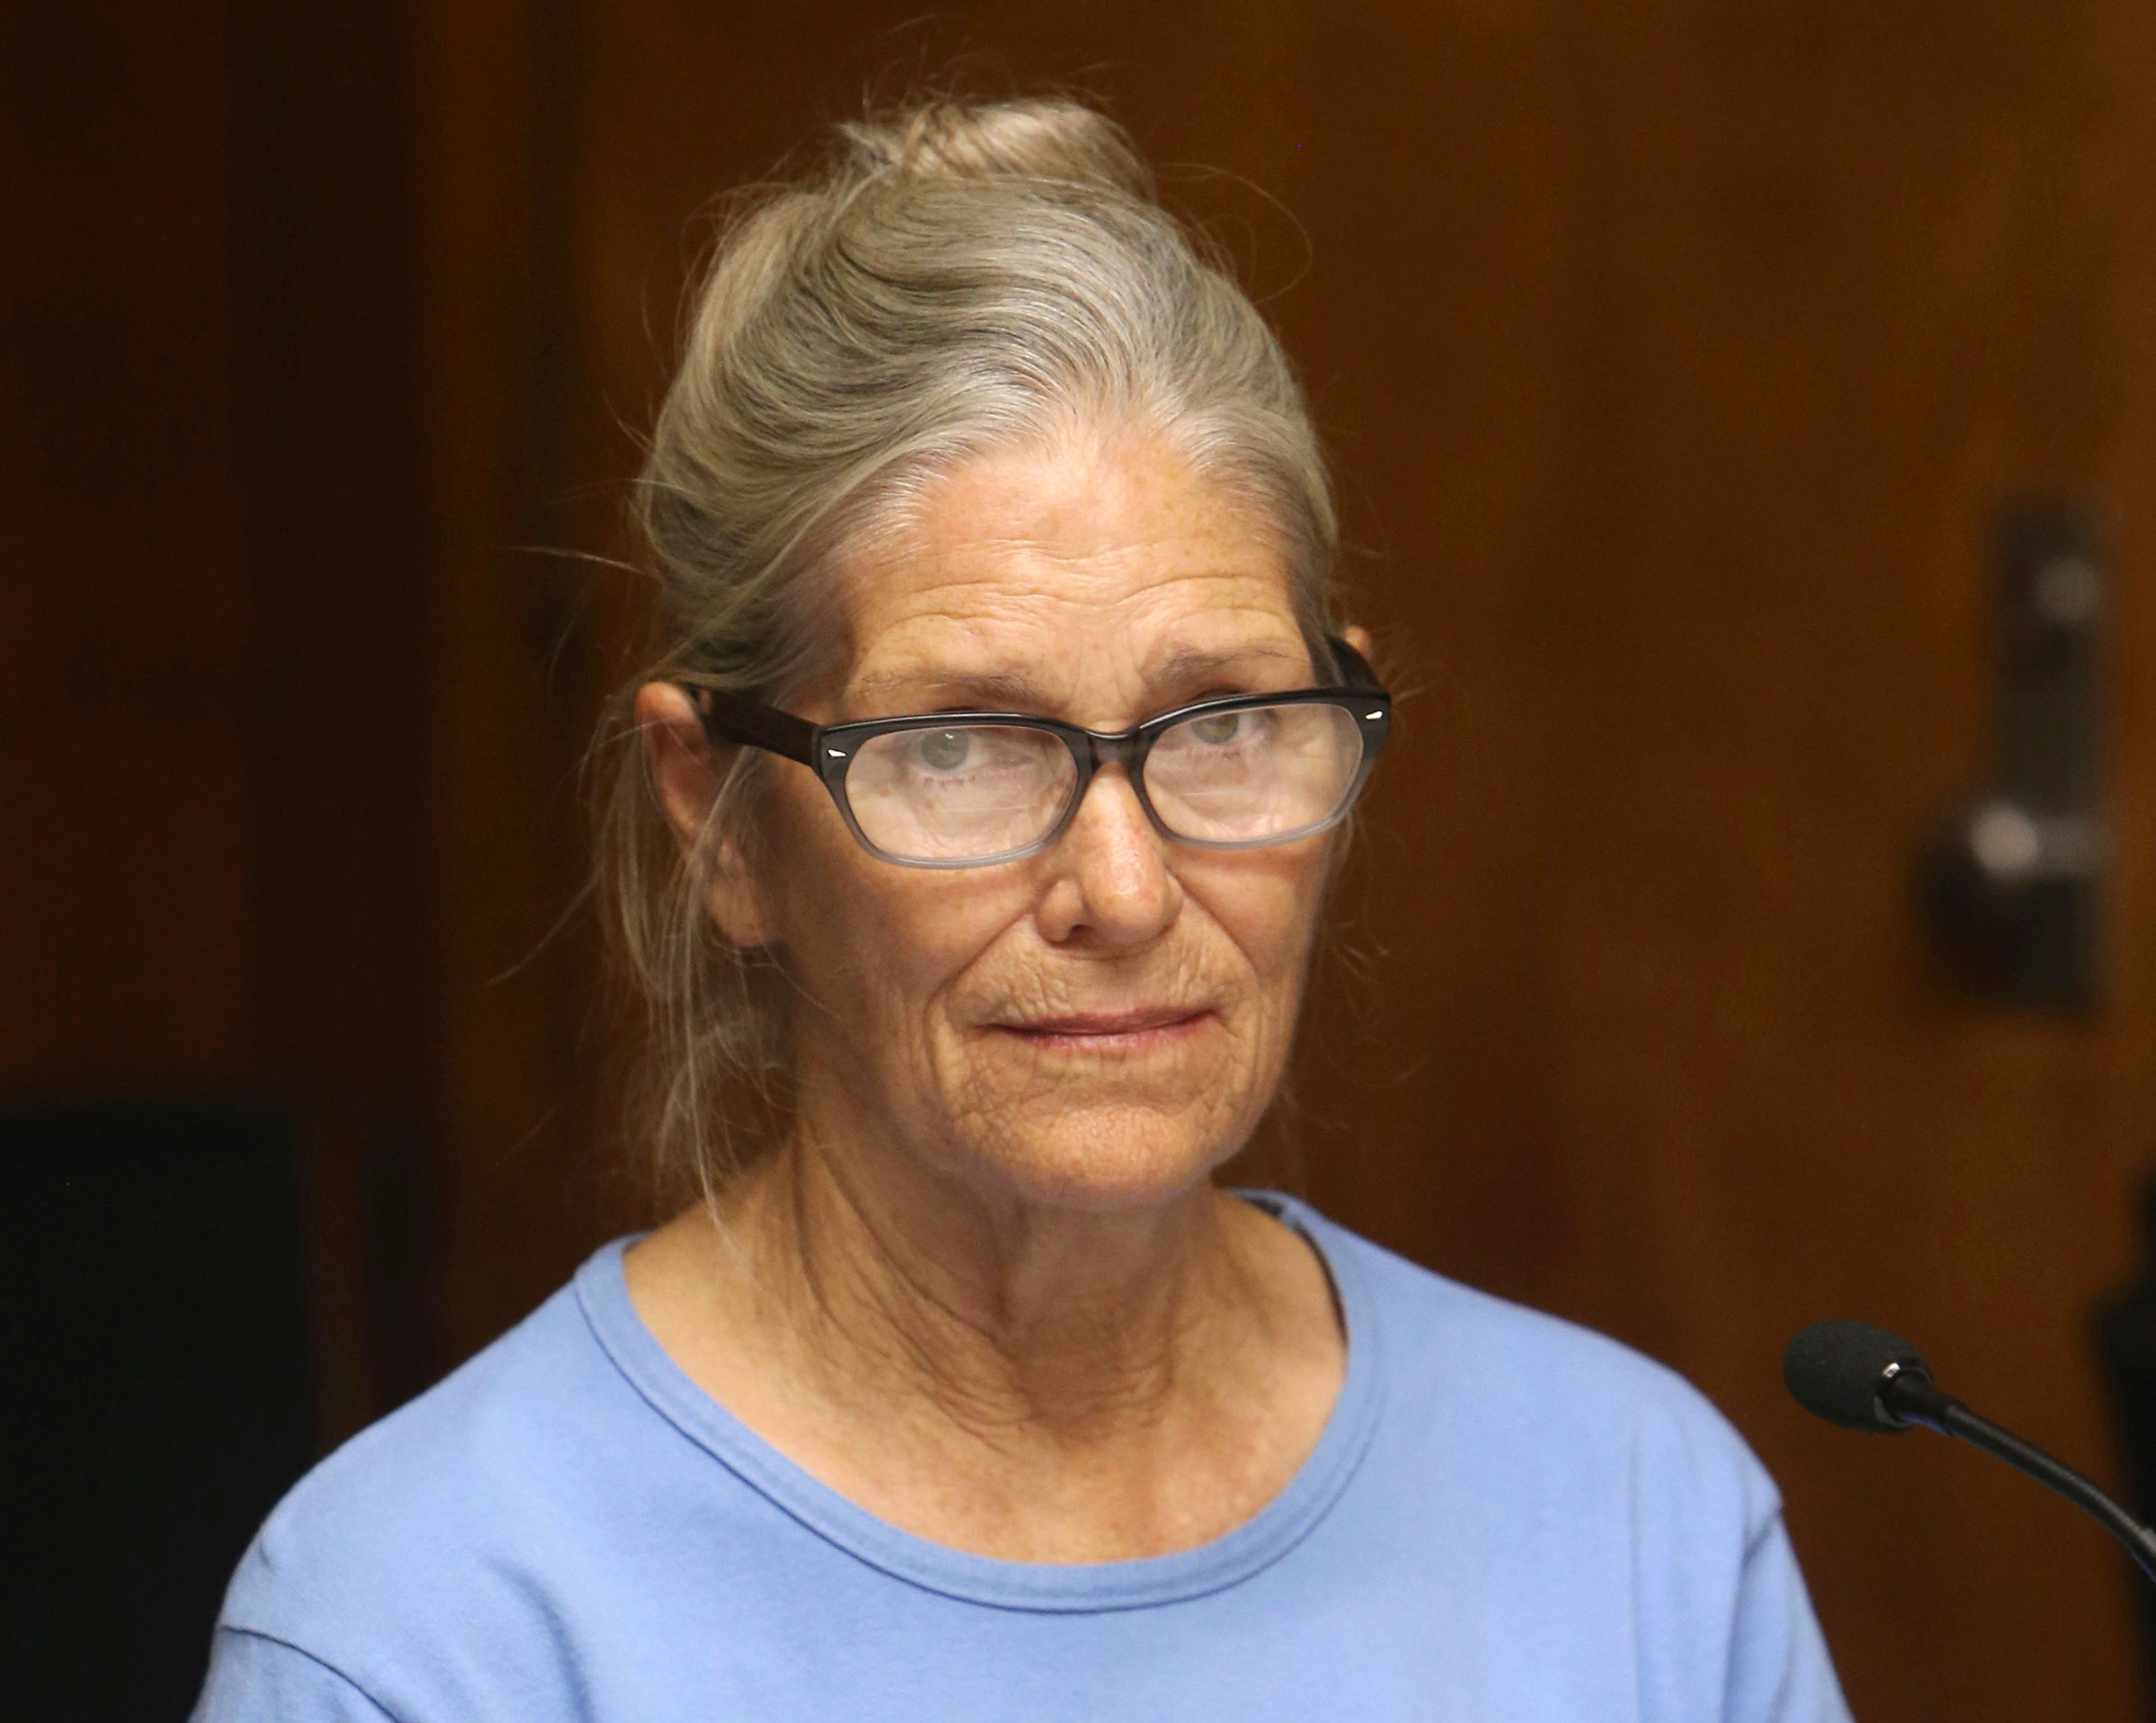 Leslie Van Houten attends her parole hearing at the California Institution for Women in Corona, Calif., on Sept. 6, 2017.